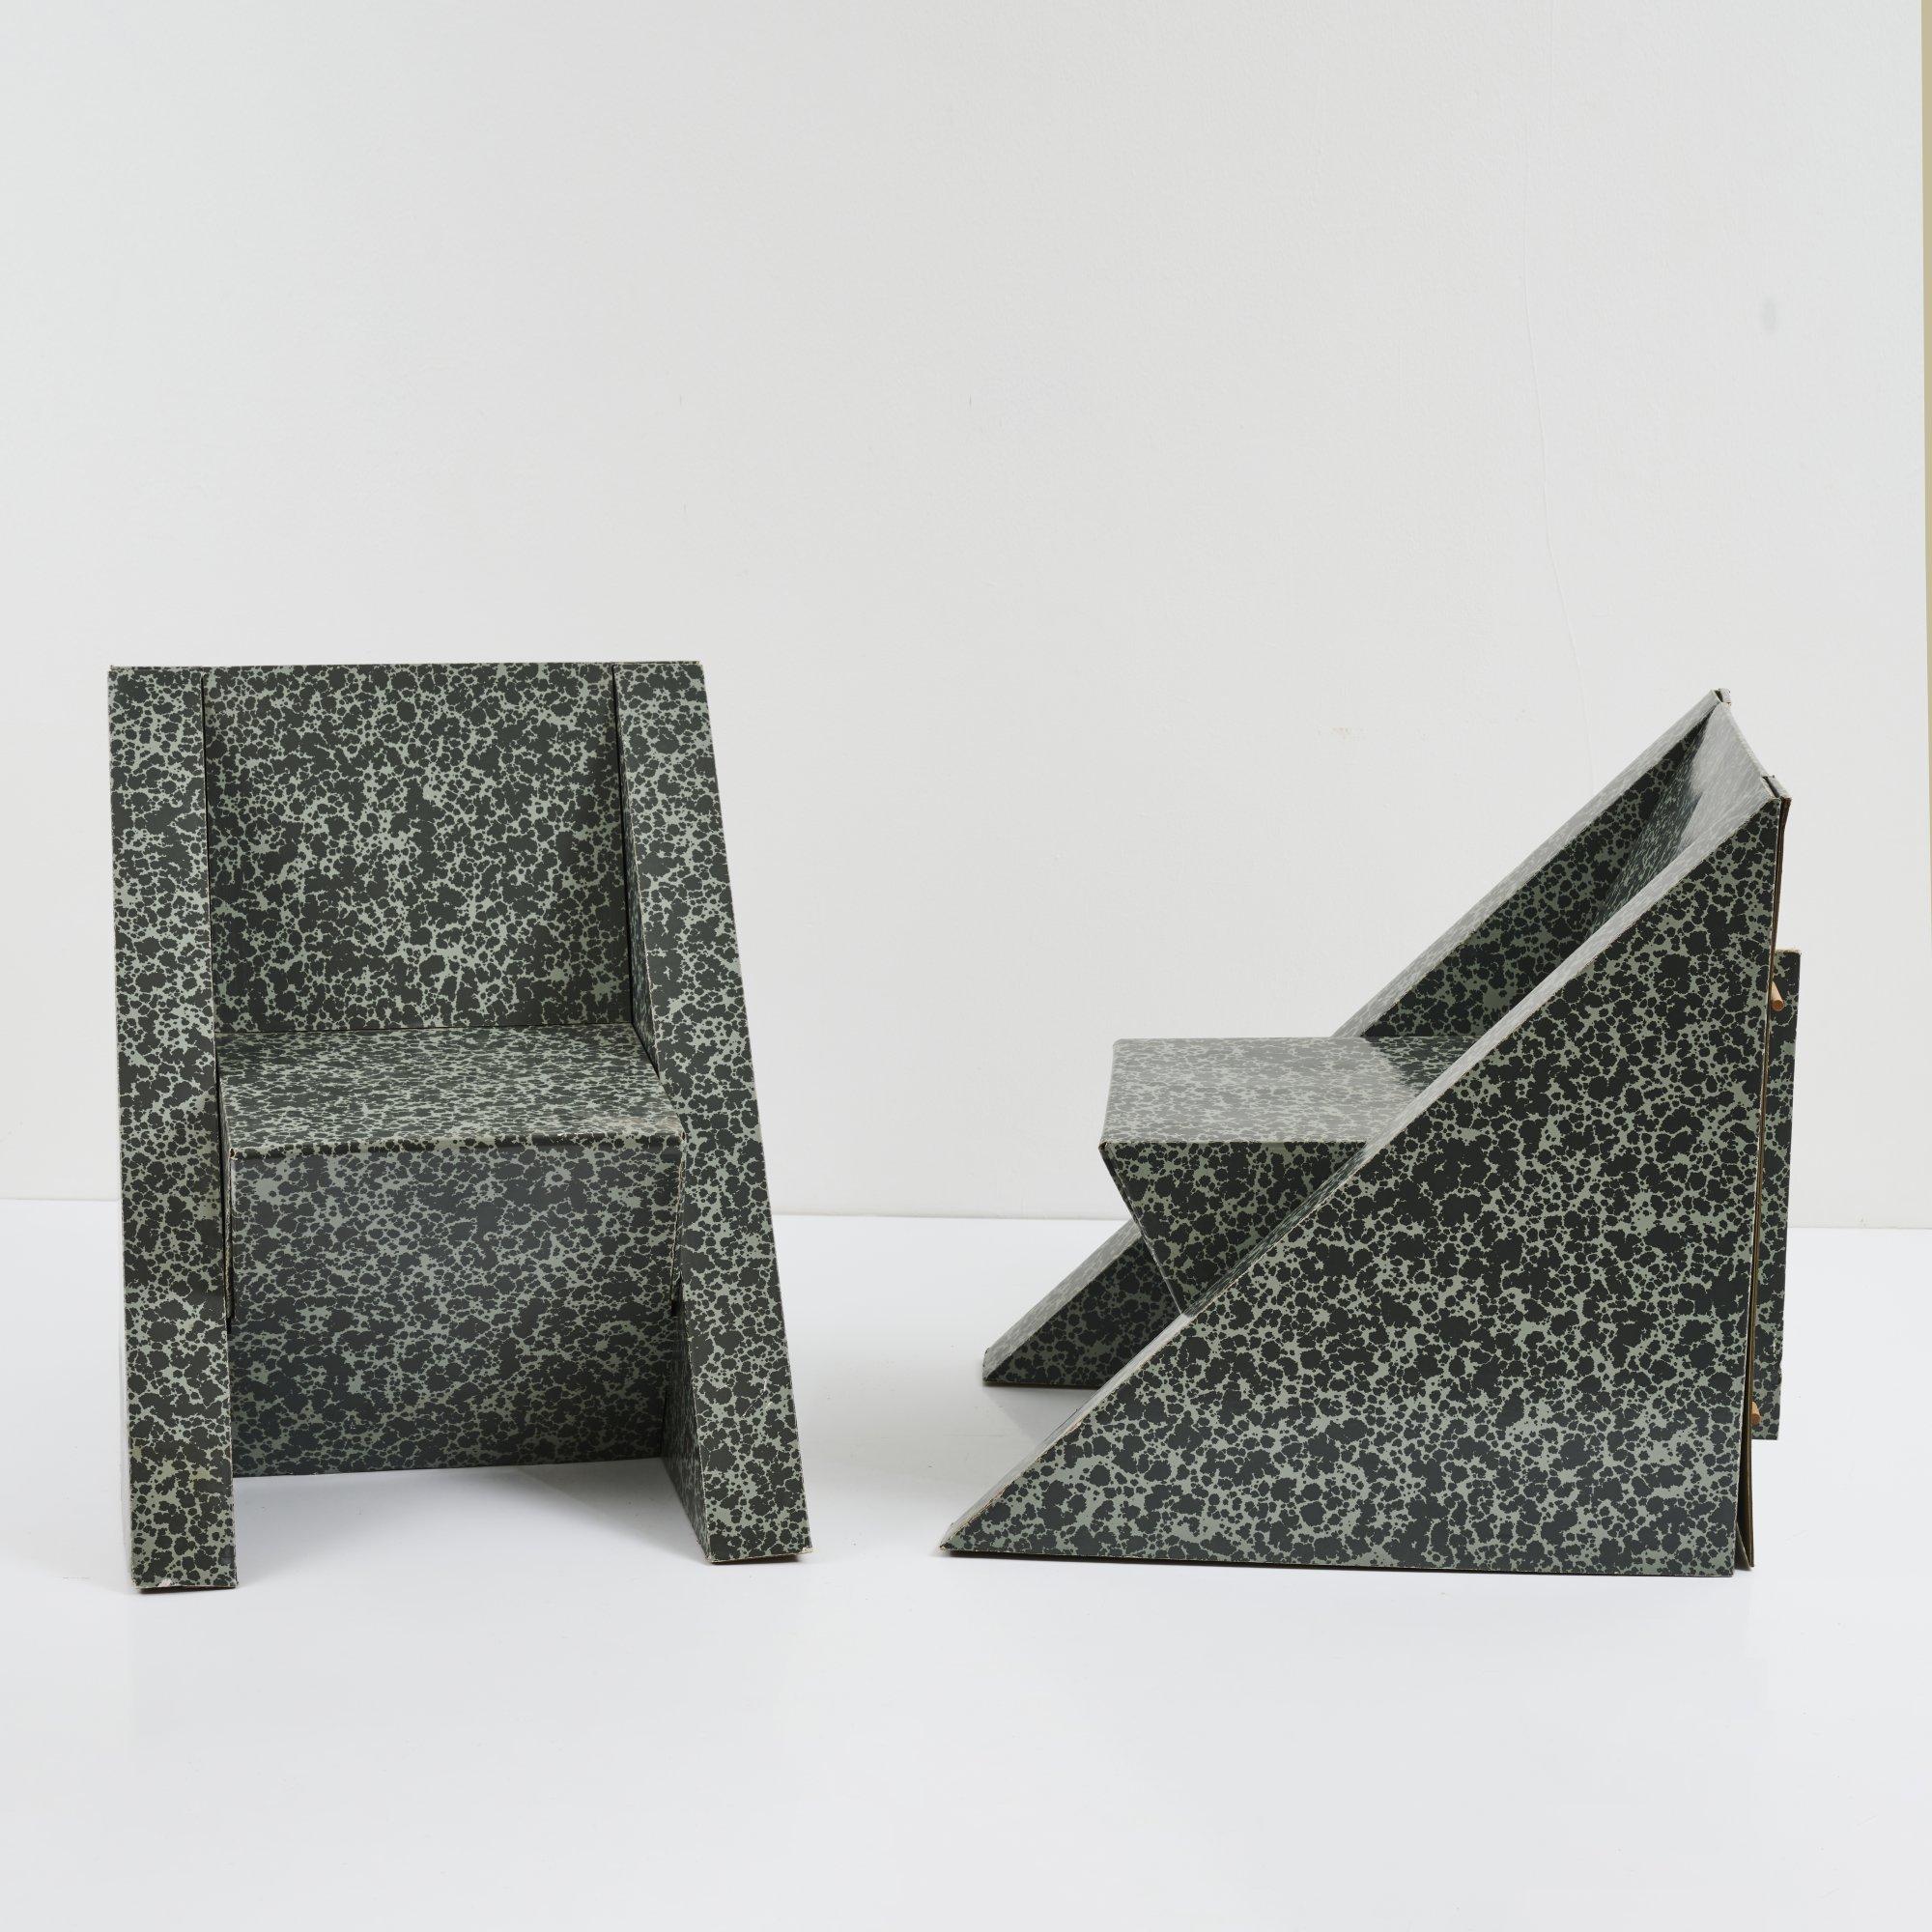 Set of two Cardboard Armchairs, prototypes attributed to the Memphis Group, manufactured in Milan, Italy circa 1980. 

Both chairs are made of gray marbled cardboard and in good original condition. 